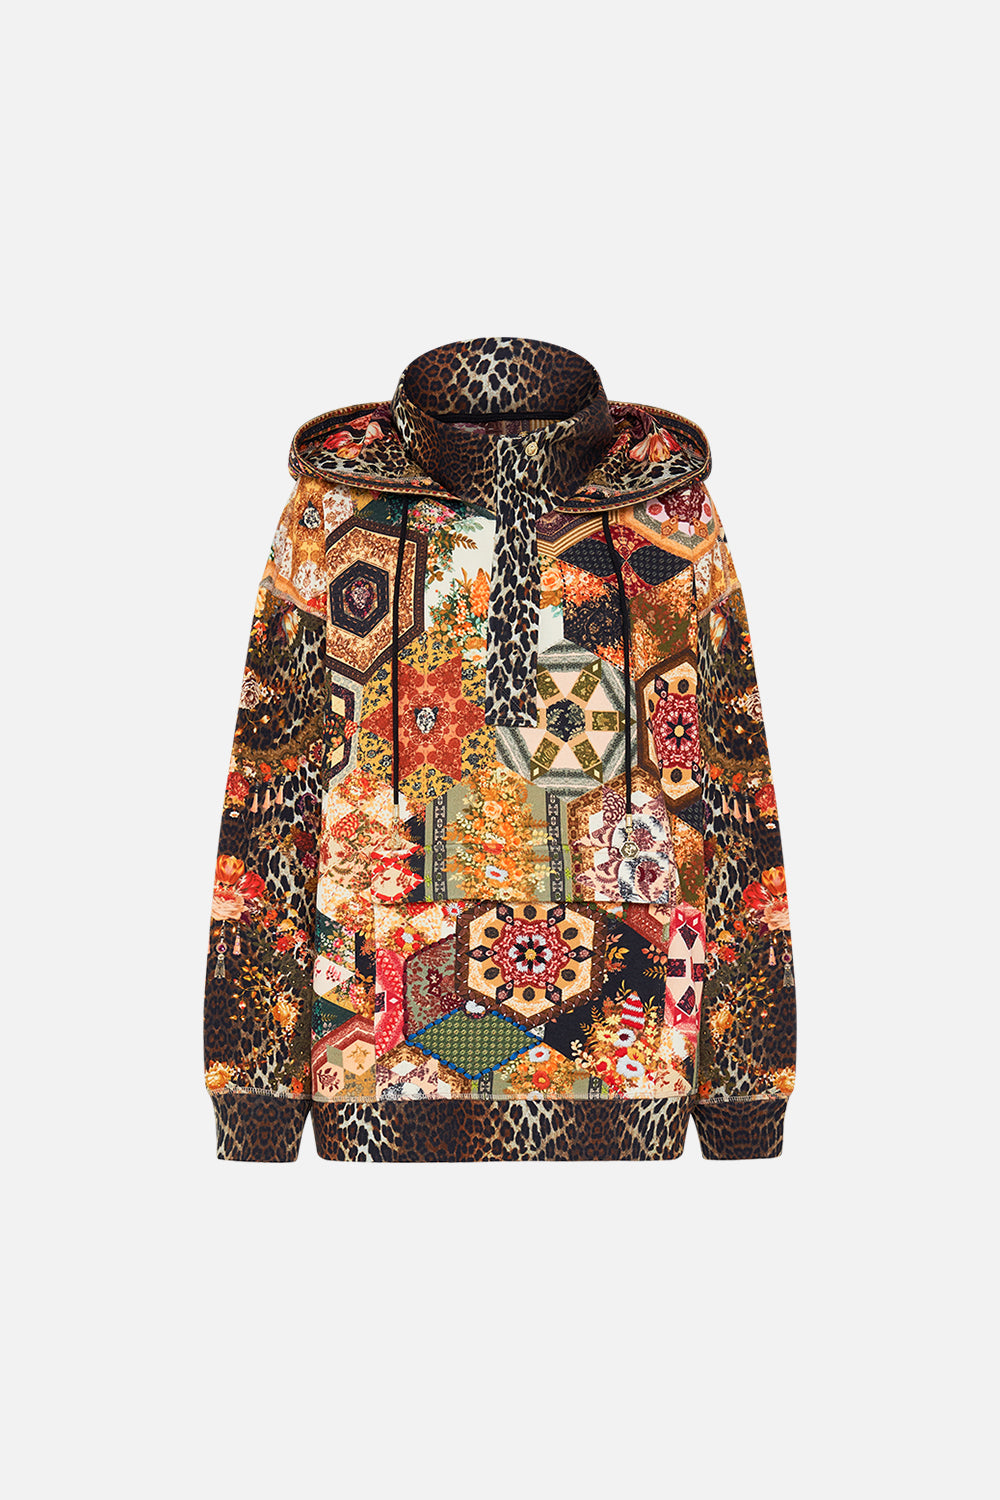 CAMILLA floral half-zip hoodie with pocket flap in Stitched In Time print.